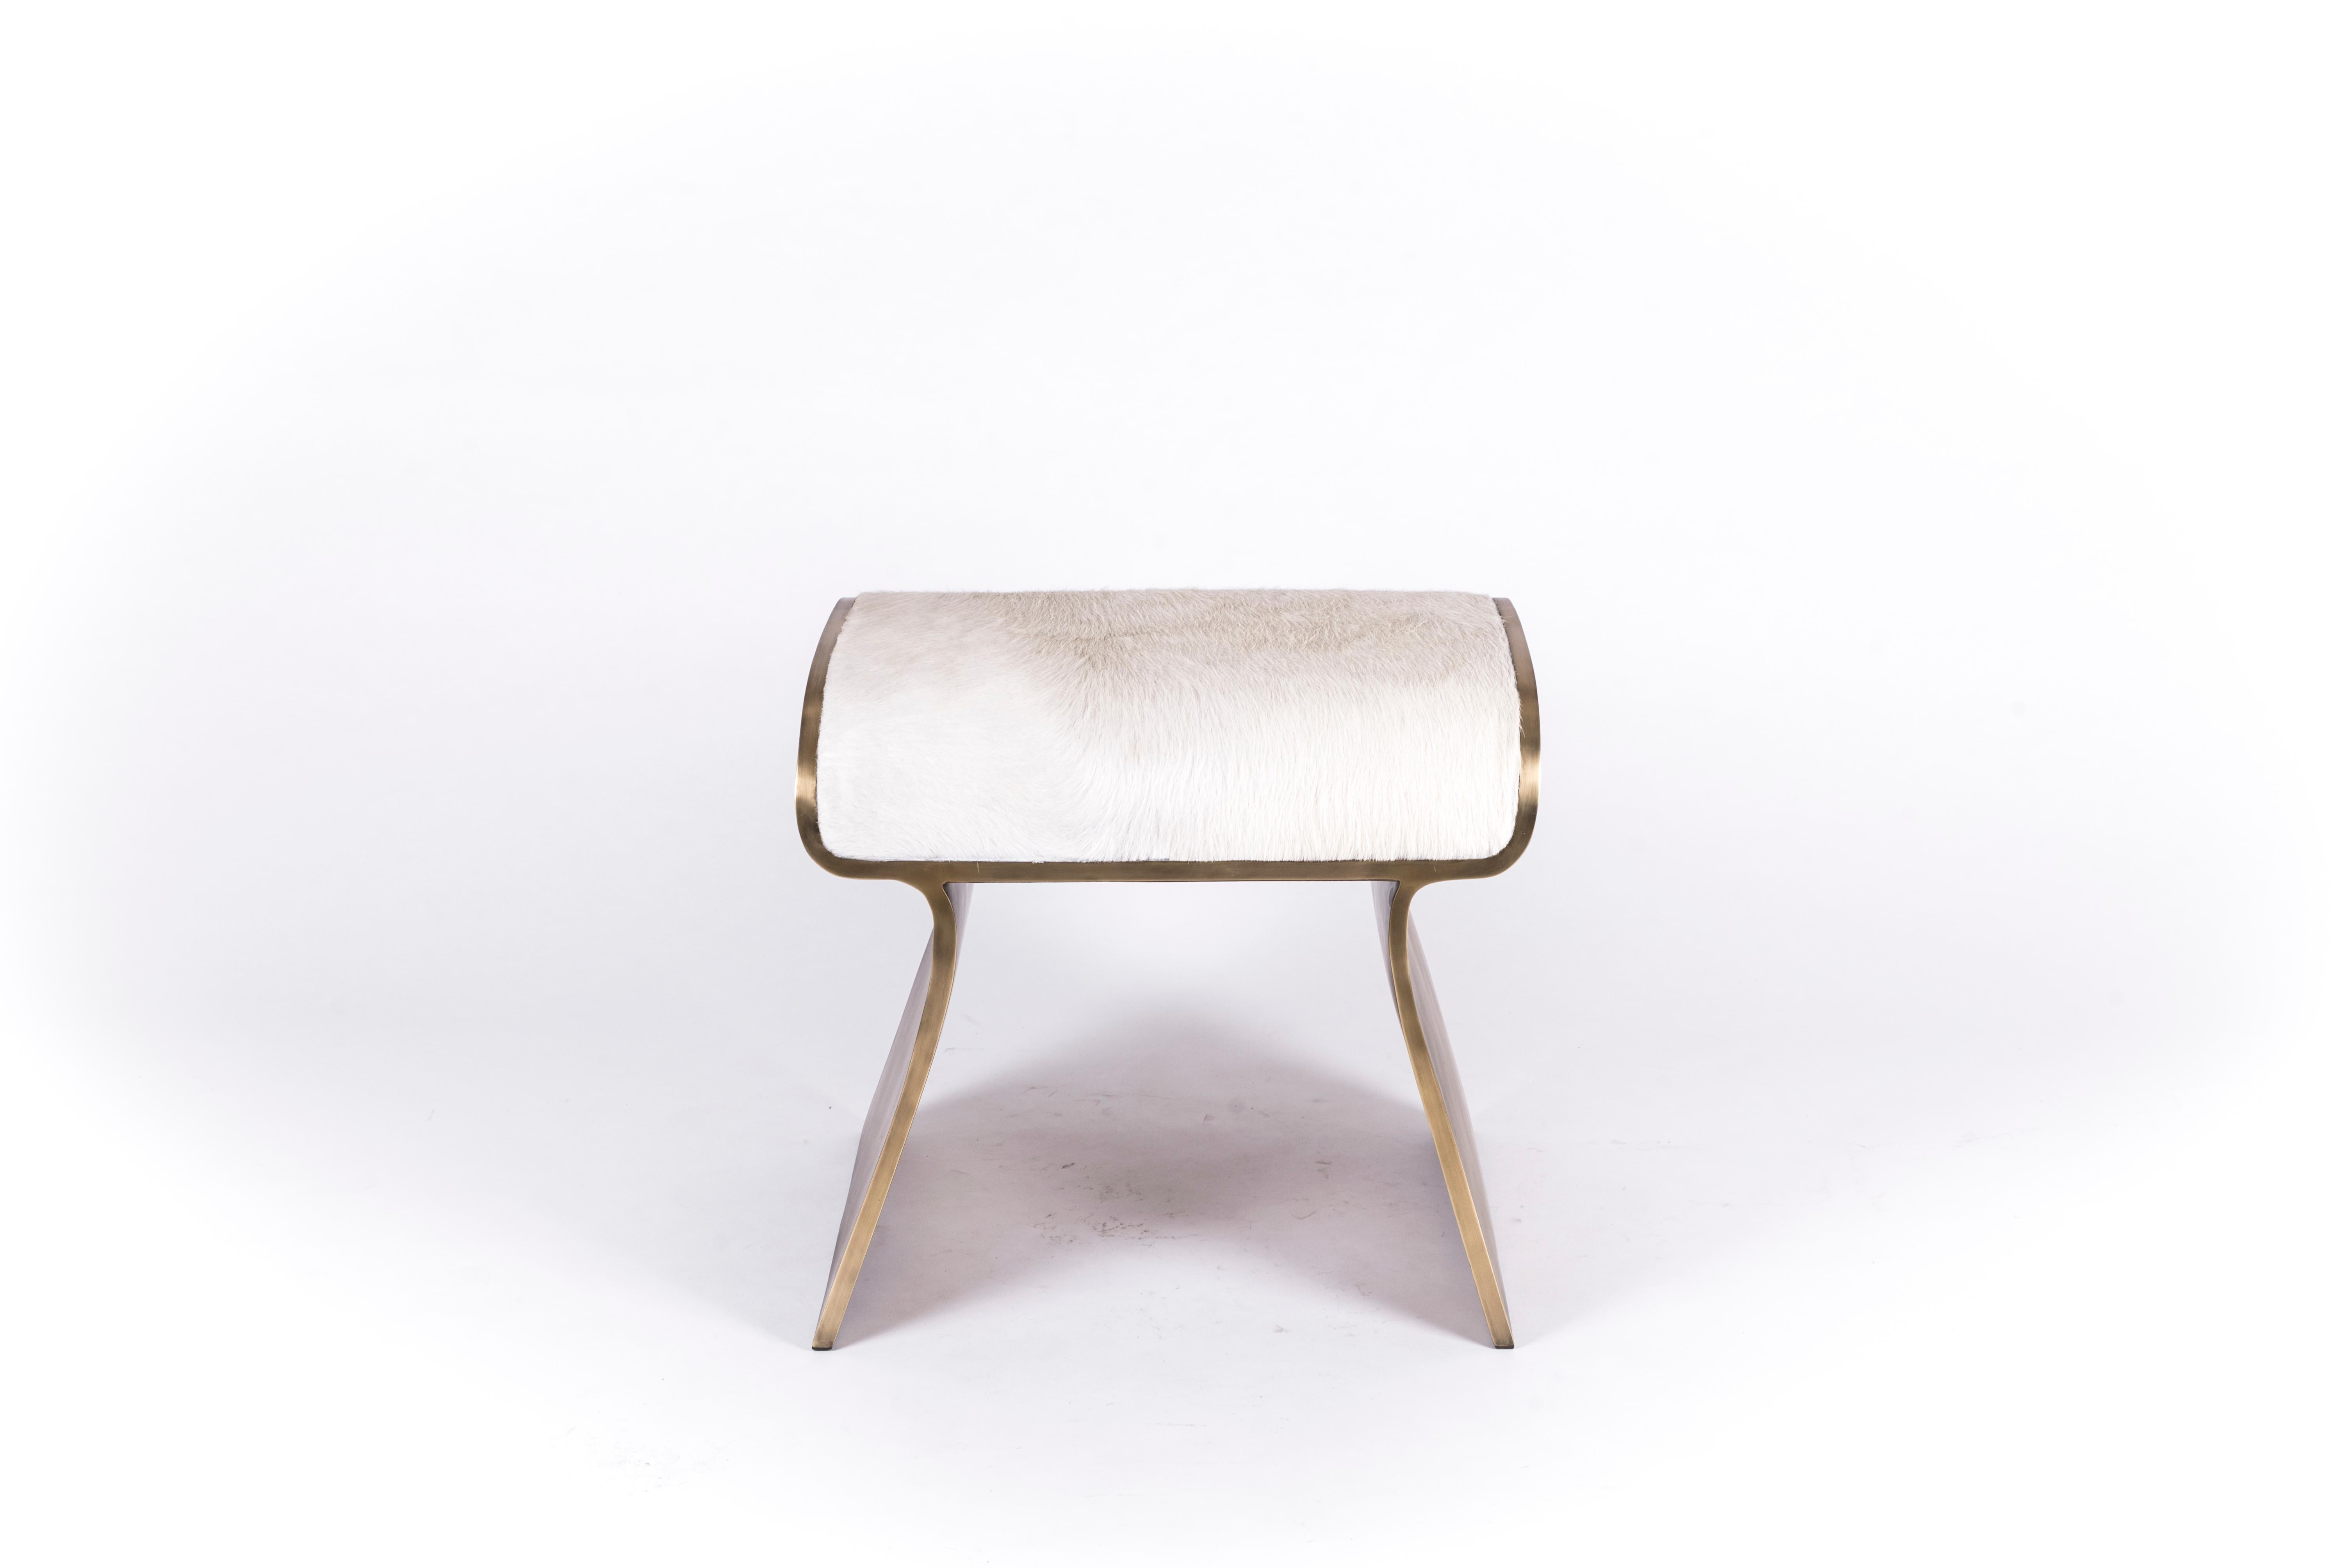 The dandy stool in upholstered in cream fur is a chic seating piece for any space. The sides of the pieces are completely inlaid in bronze-patina brass adding another luxurious element to the piece. The clean lines make it an adaptable piece and the